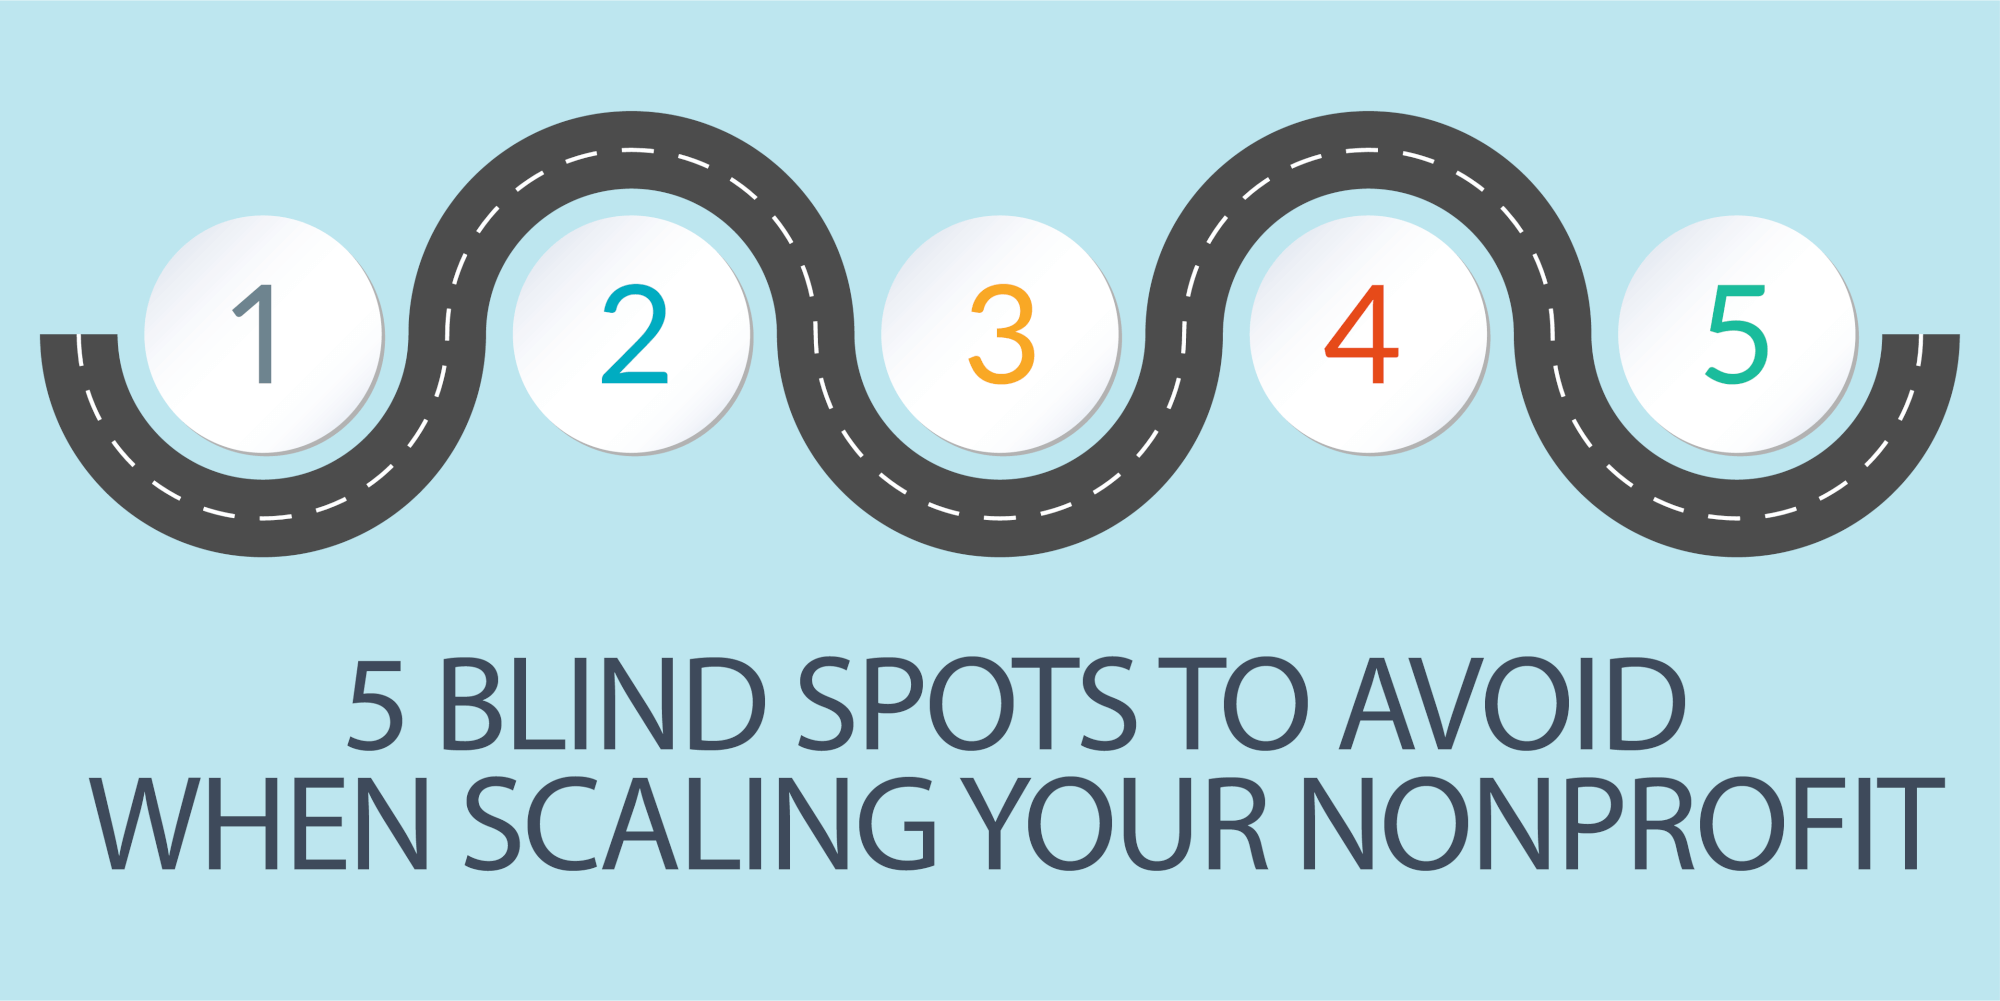 5 Blind Spots to Avoid When Scaling Your Nonprofit